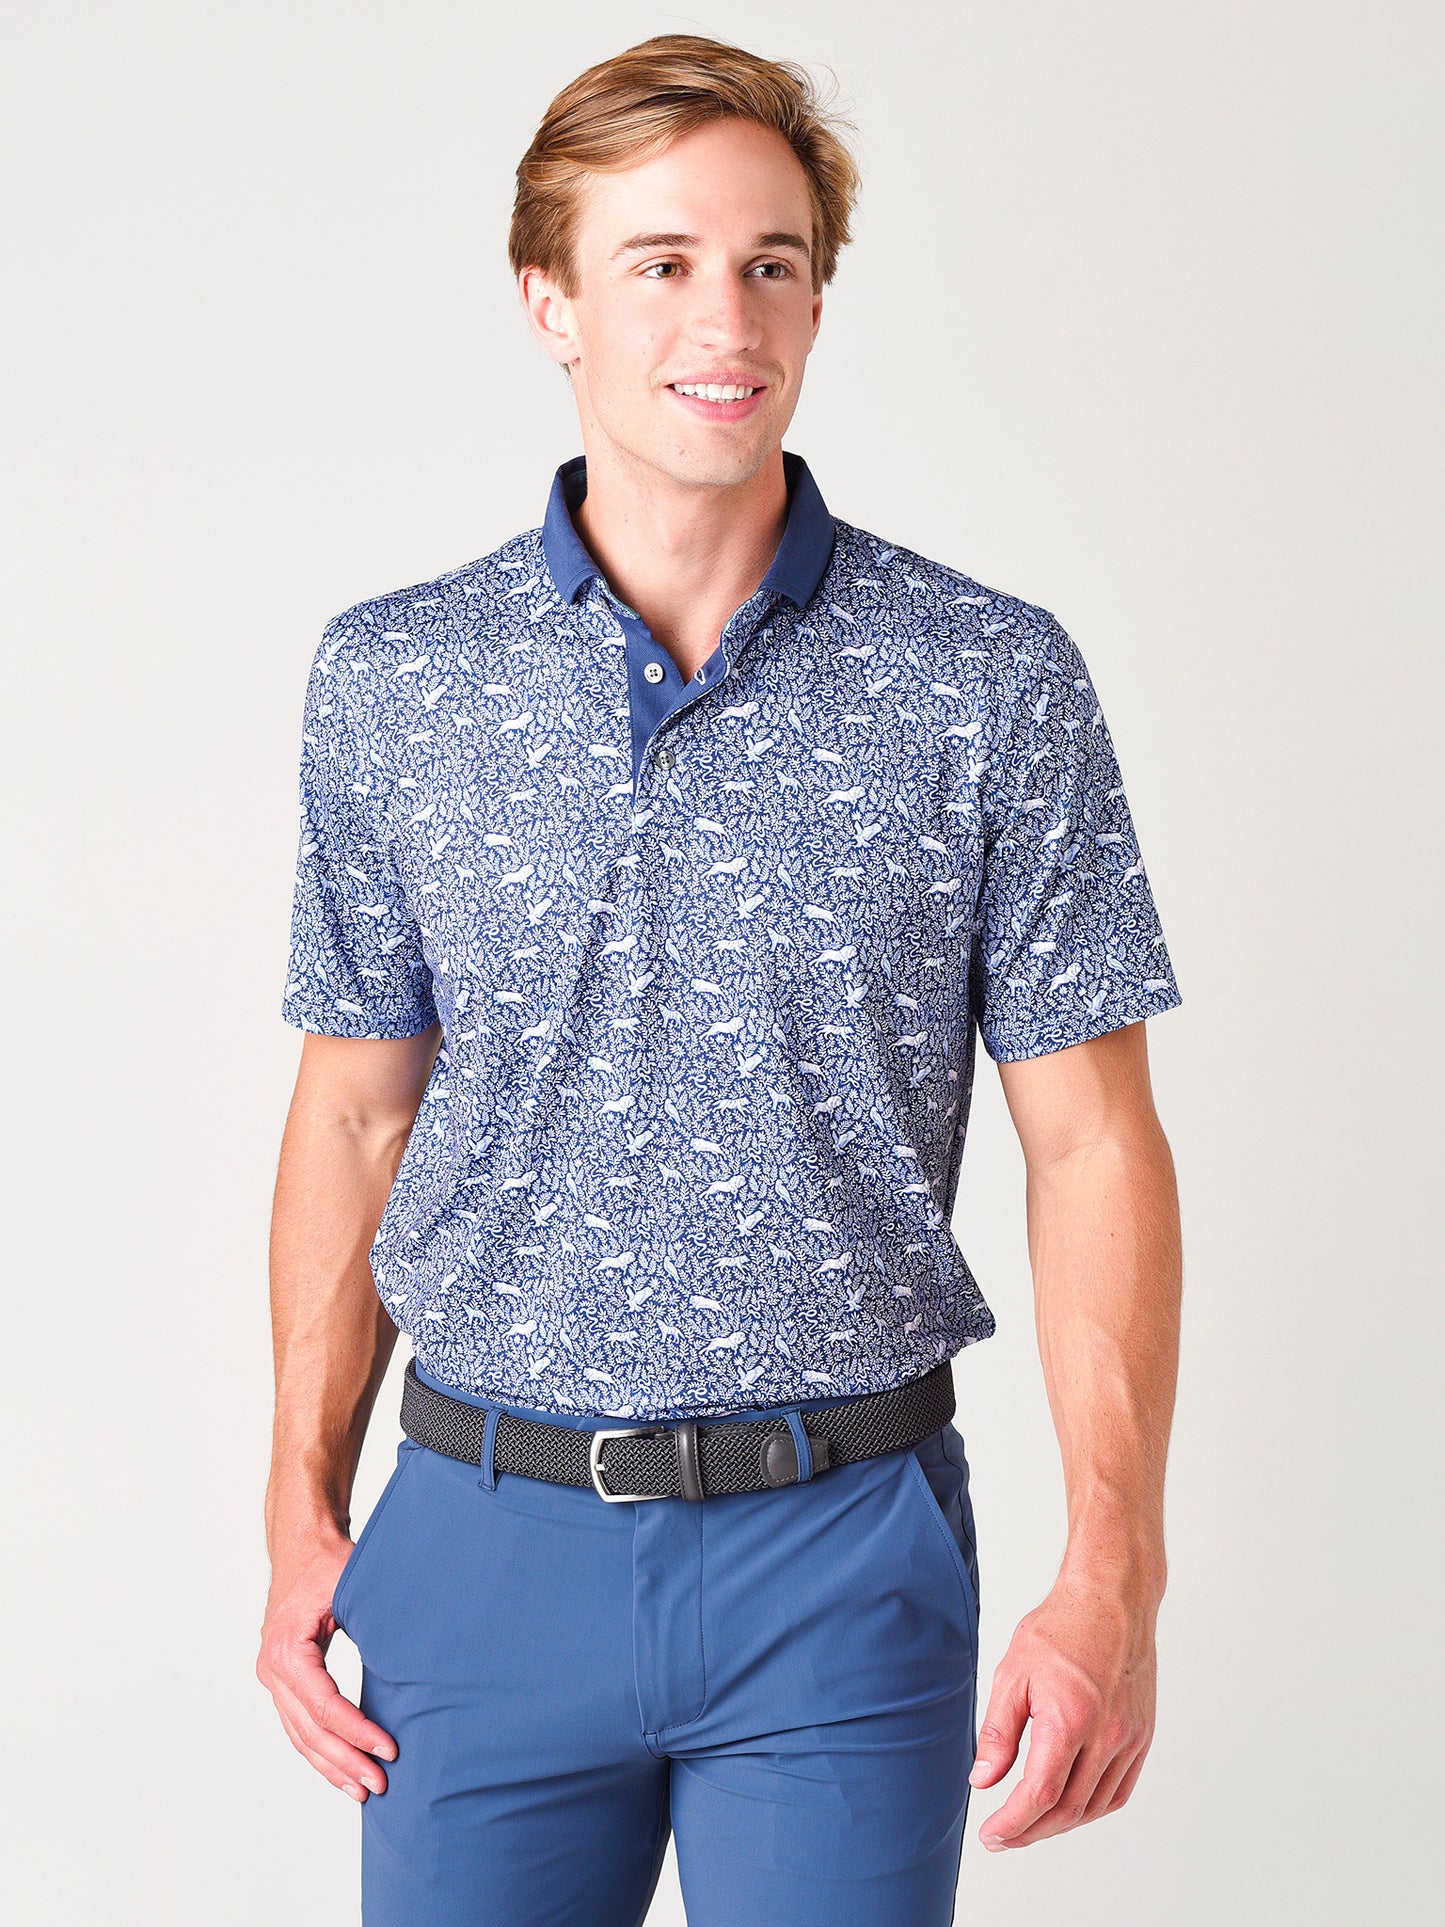 Greyson Men's Kings and Queens Polo